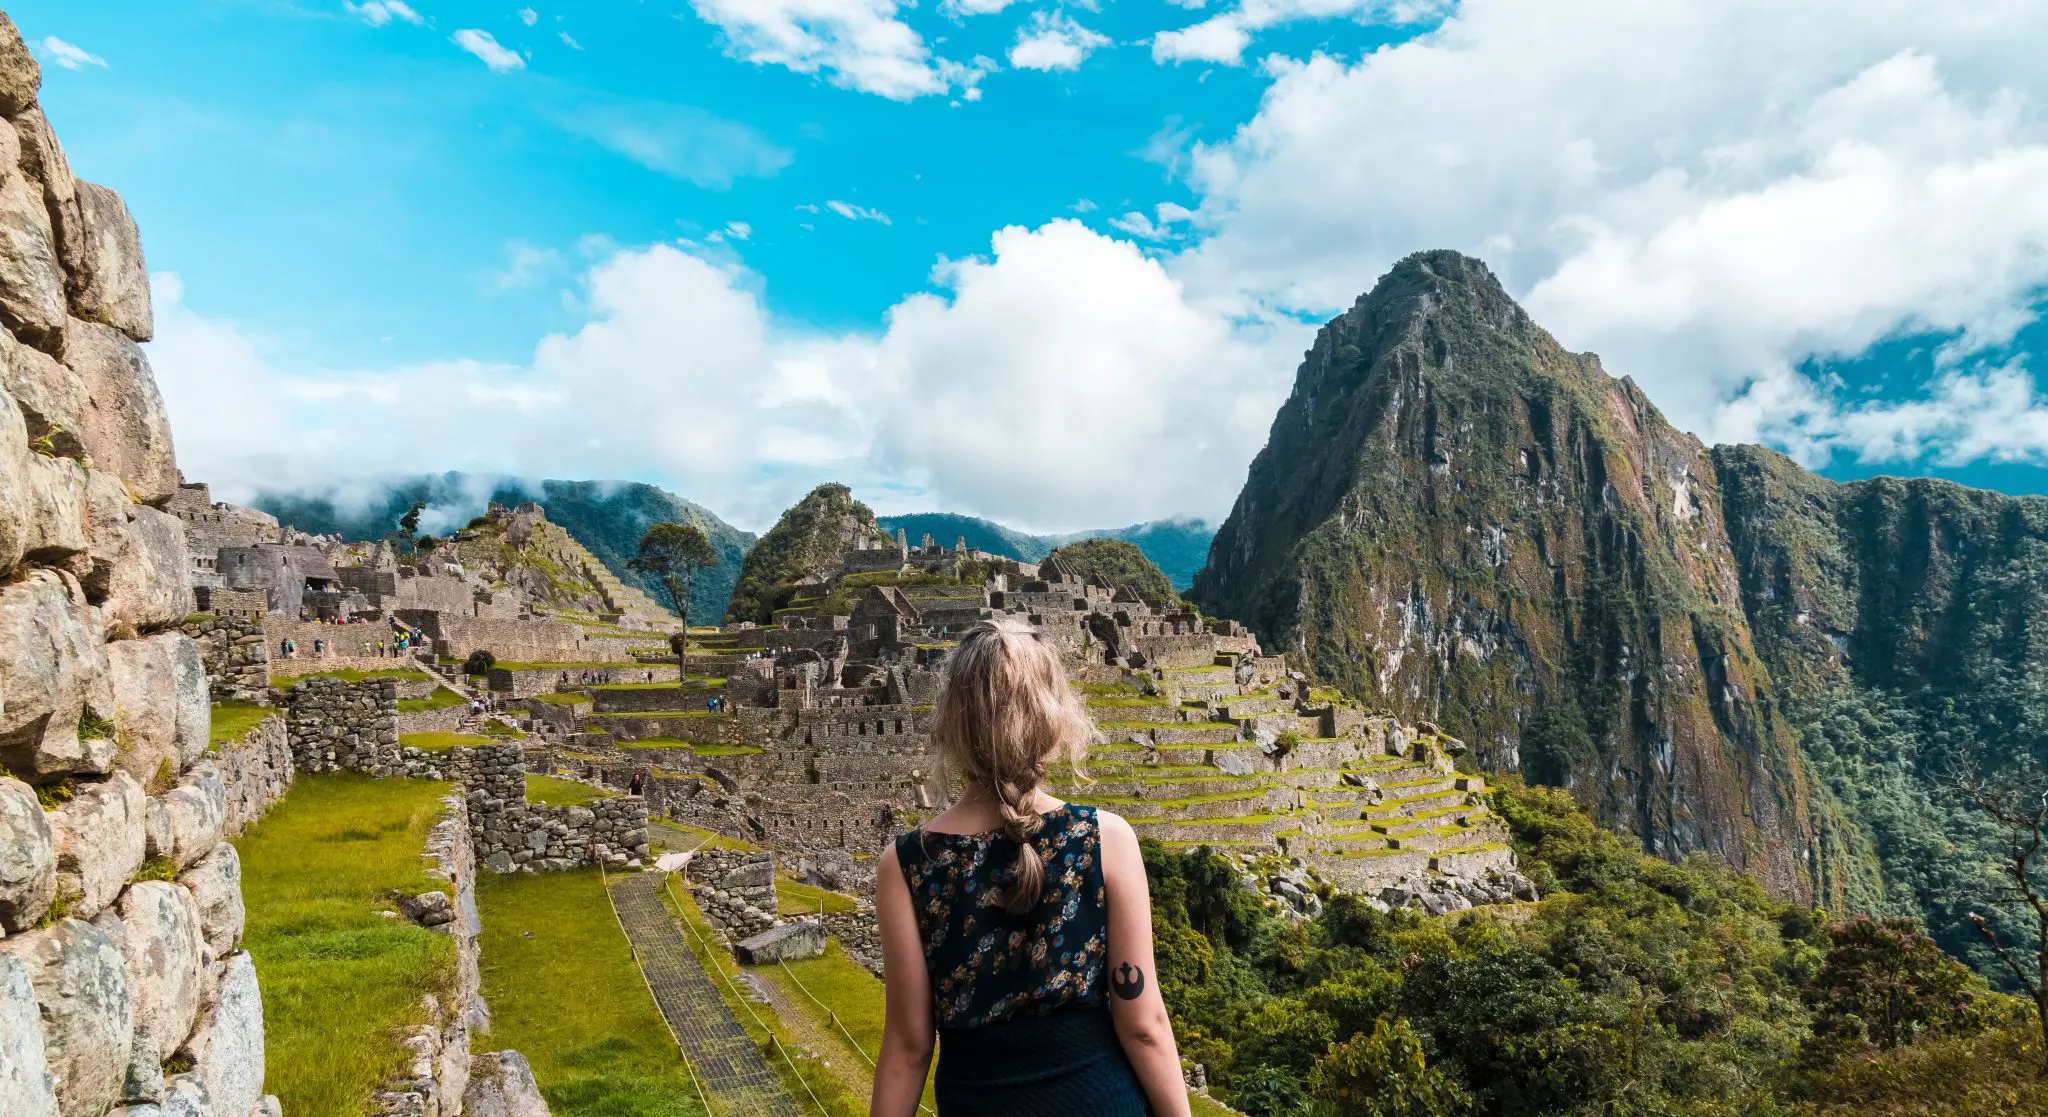 Facts and FAQs About Machu Picchu